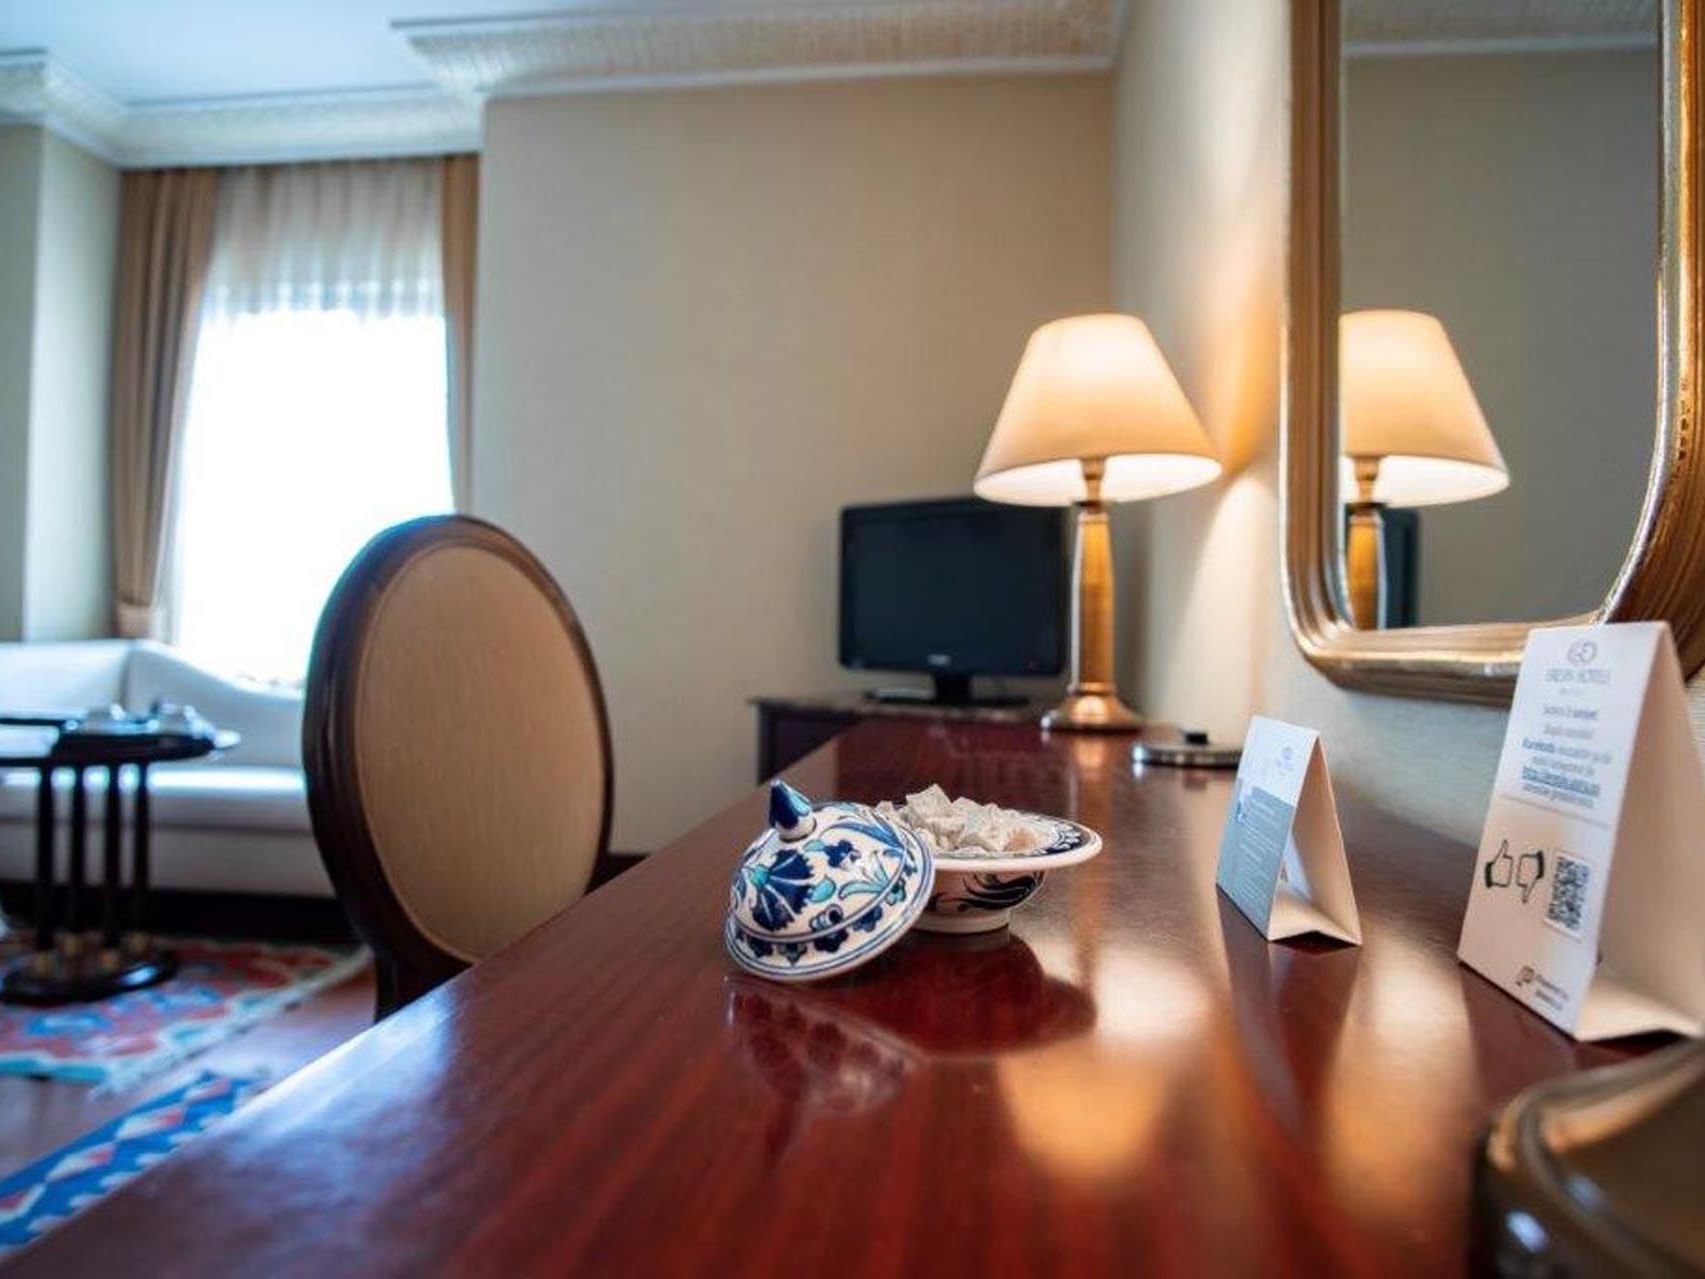 Relax in Style: Eresin Deluxe Room. King bed, modern amenities, central location, Blue Mosque nearby.